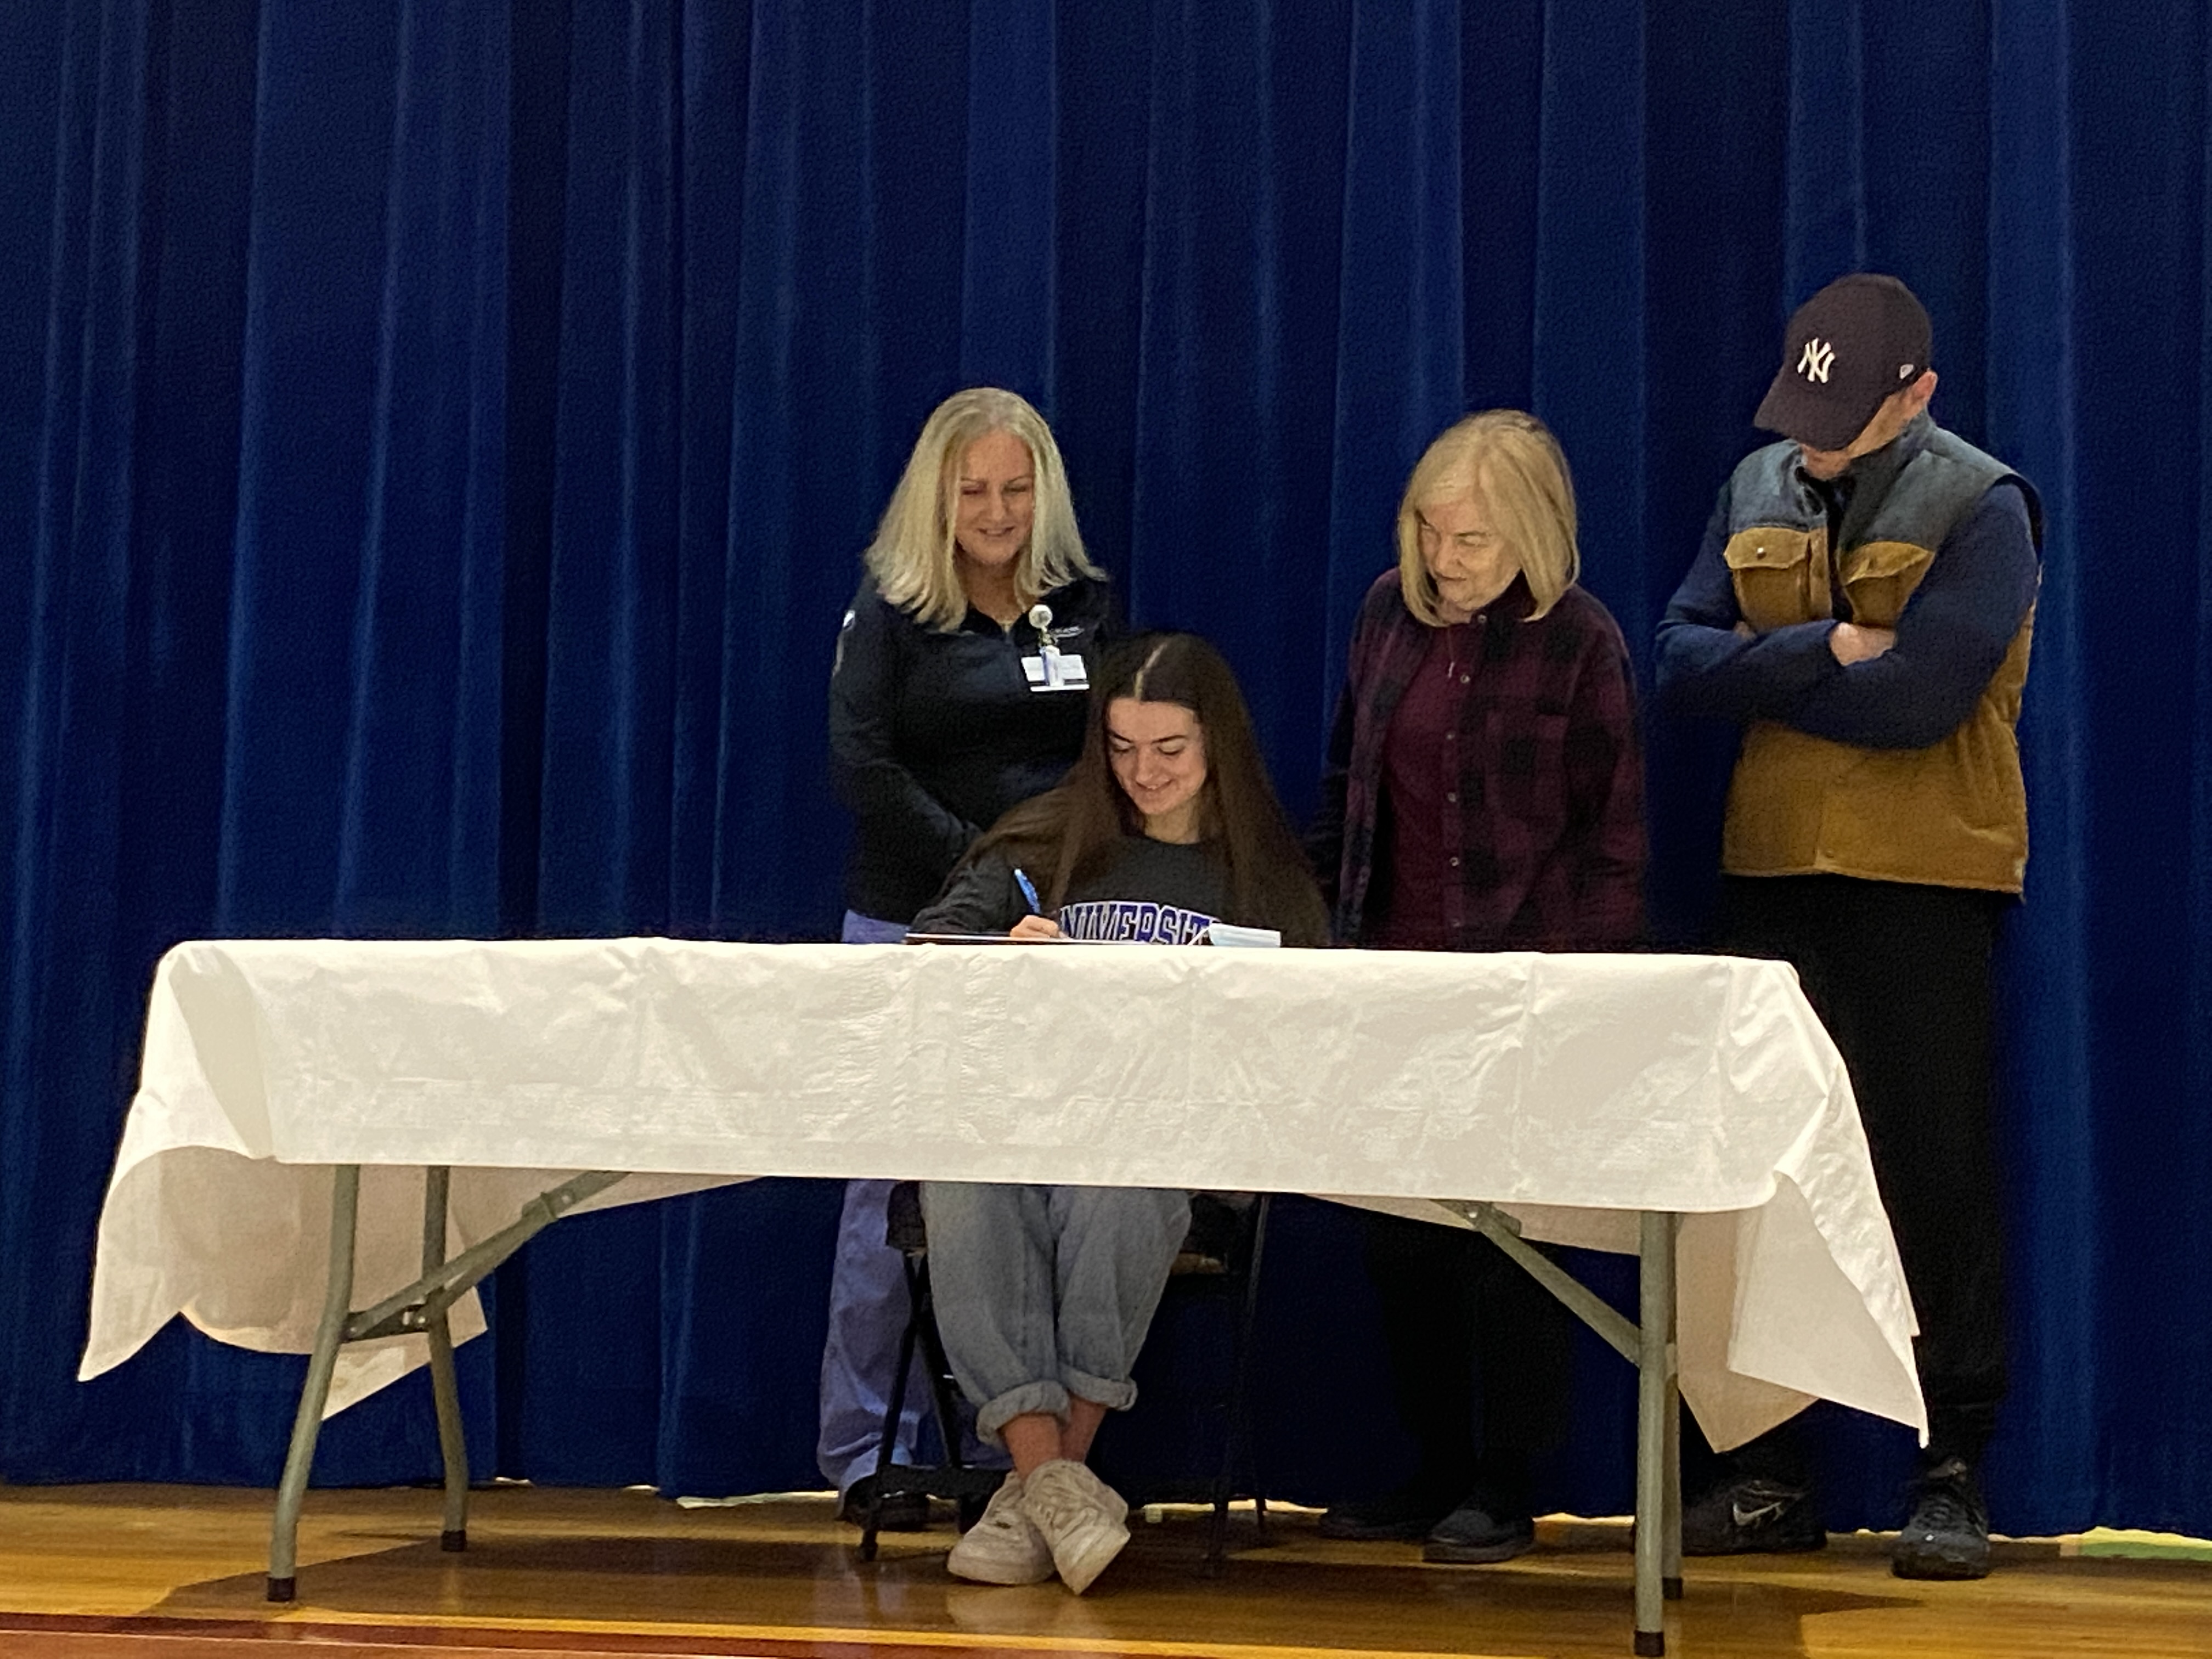 Vassianna Klock will attend University at Buffalo to play Division 1 cross country and track